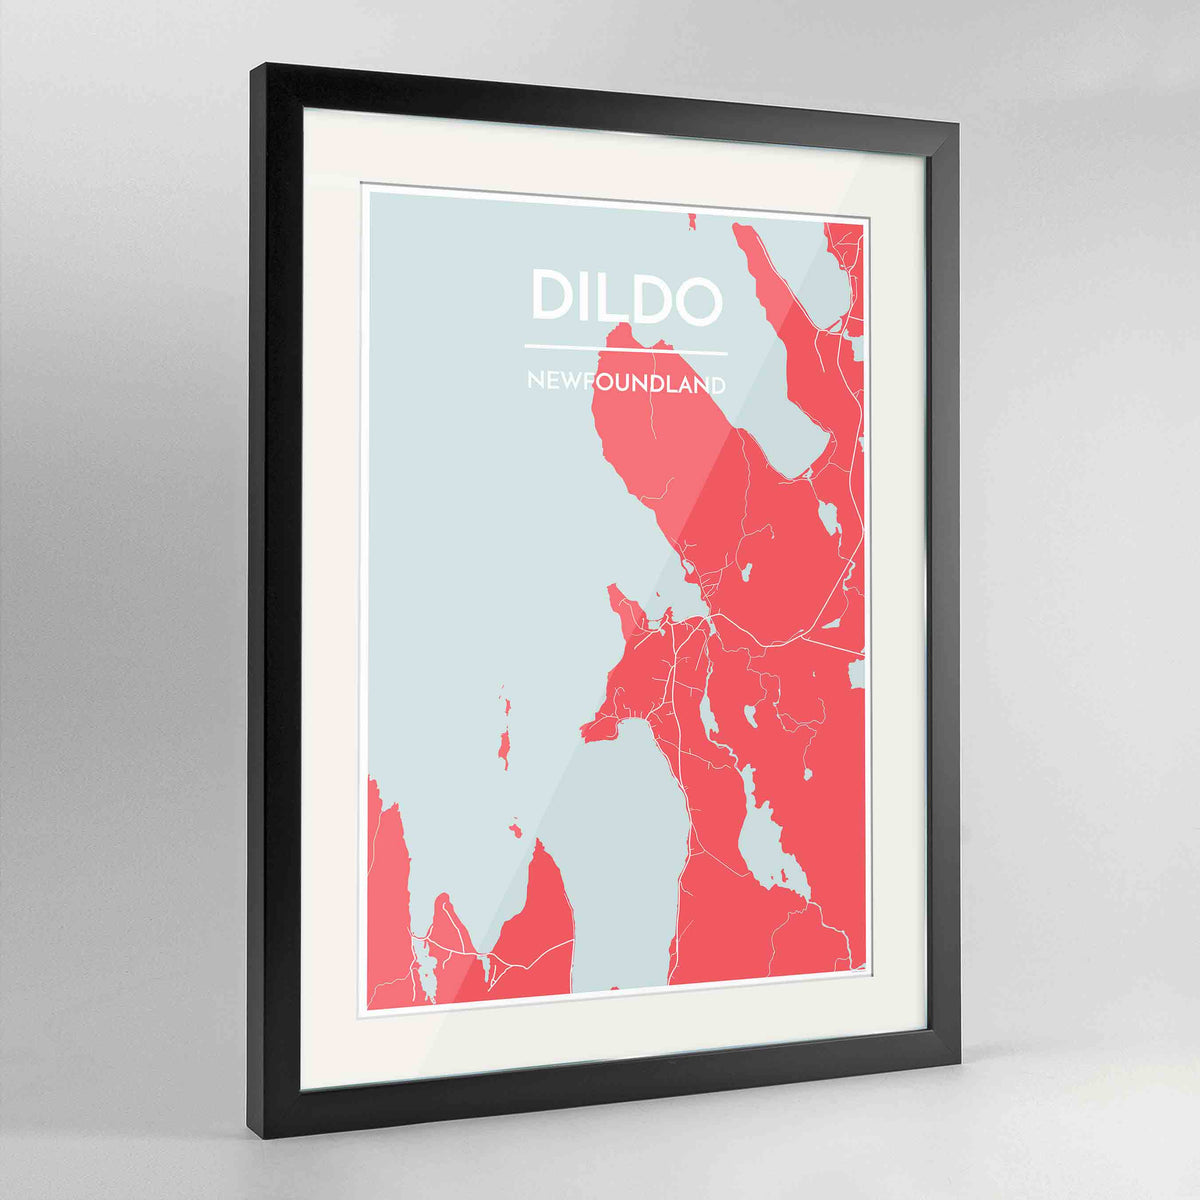 Framed Dildo Cove Map Art Print 24x36&quot; Contemporary Black frame Point Two Design Group